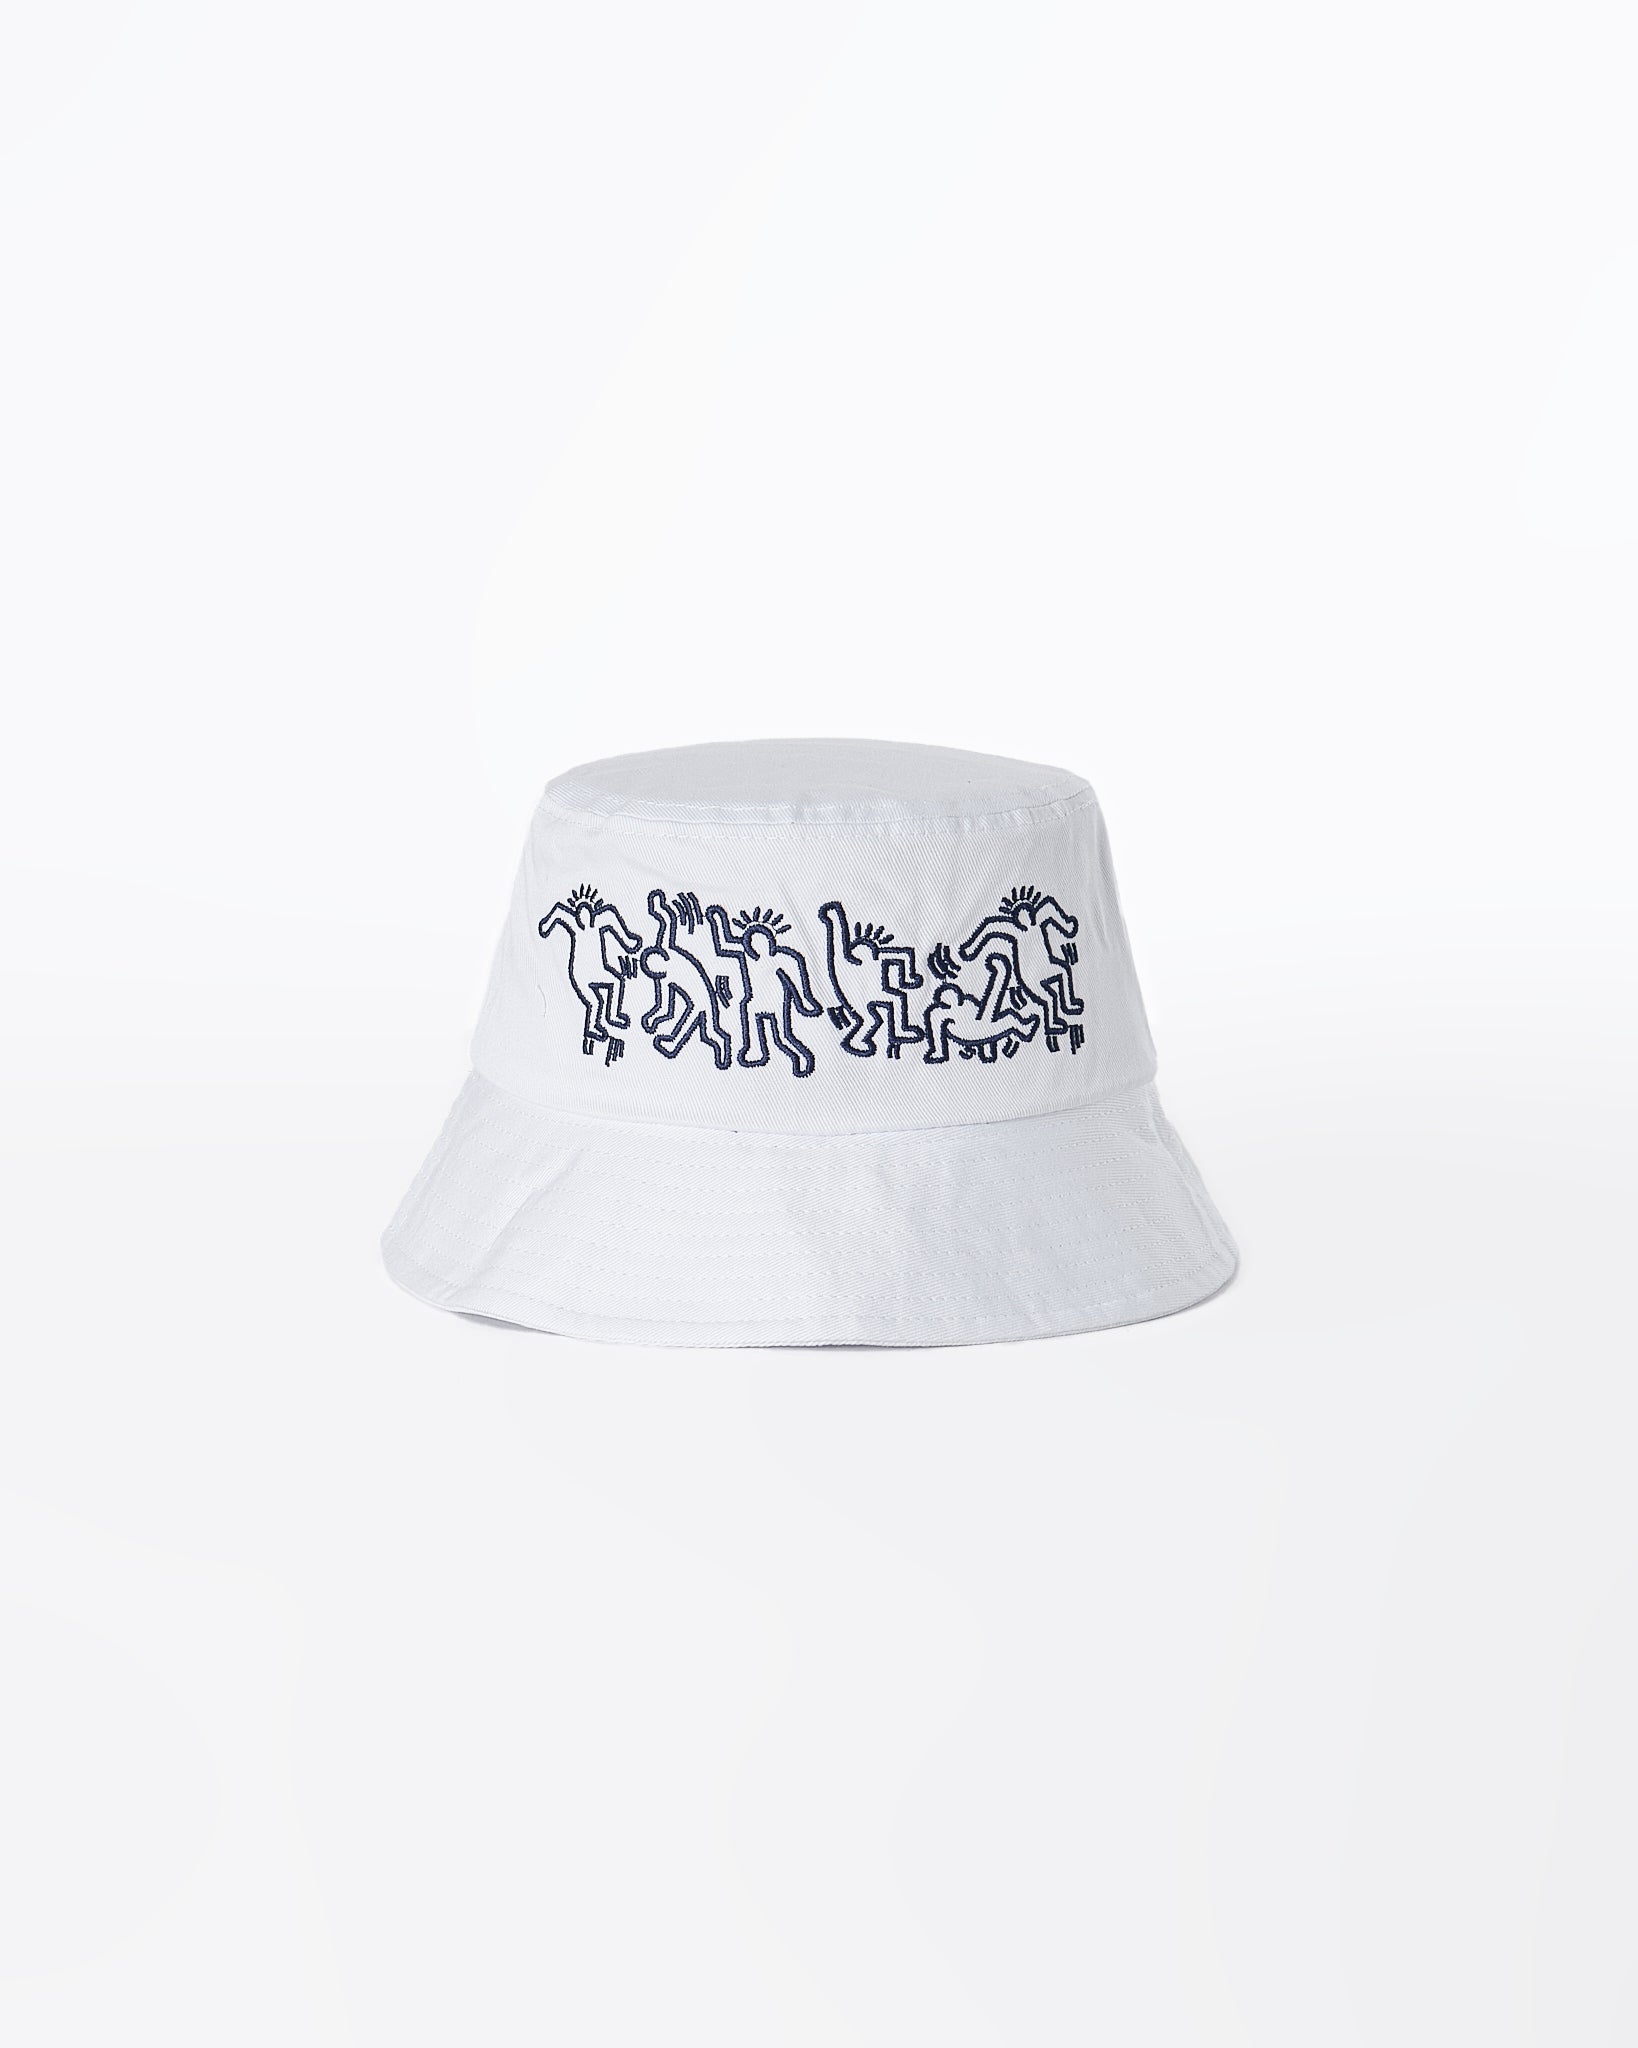 Tommy White Bucket MOI OUTFIT 13.90 - Hat